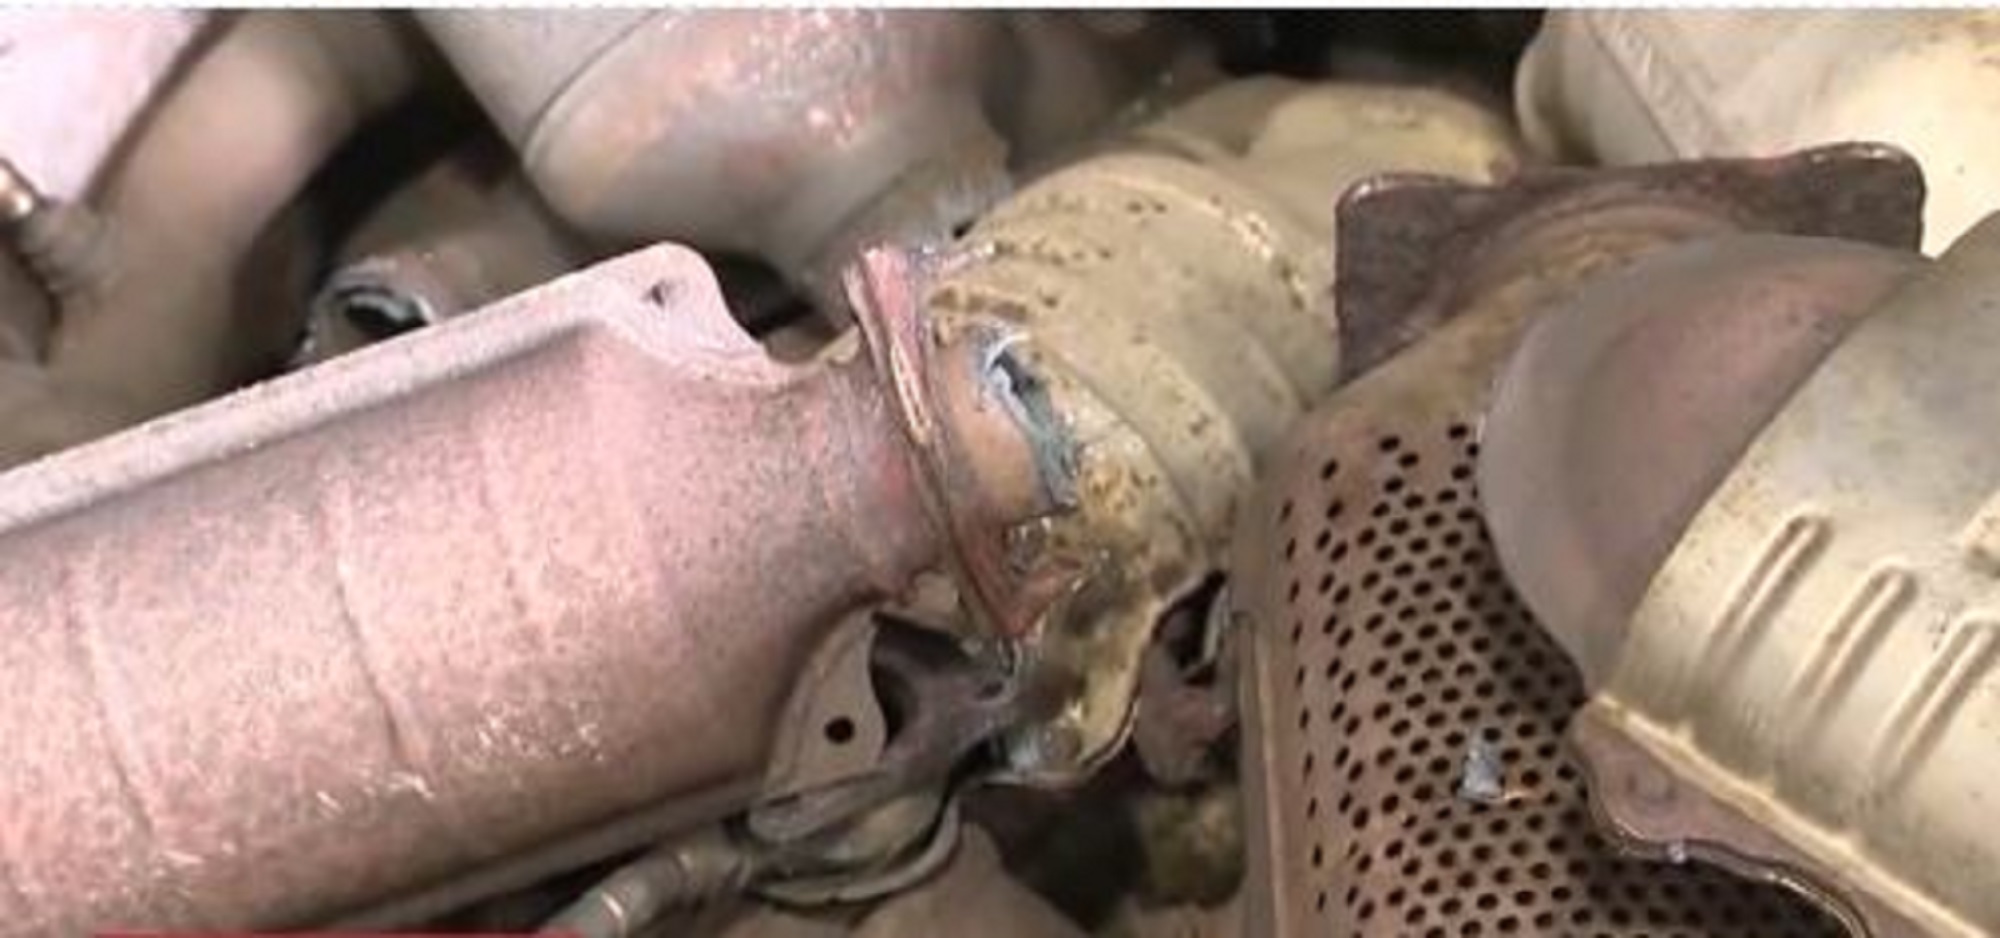 EXCLUSIVE: Catalytic converter thefts up 248% in Nassau, 183% in Suffolk so far this year